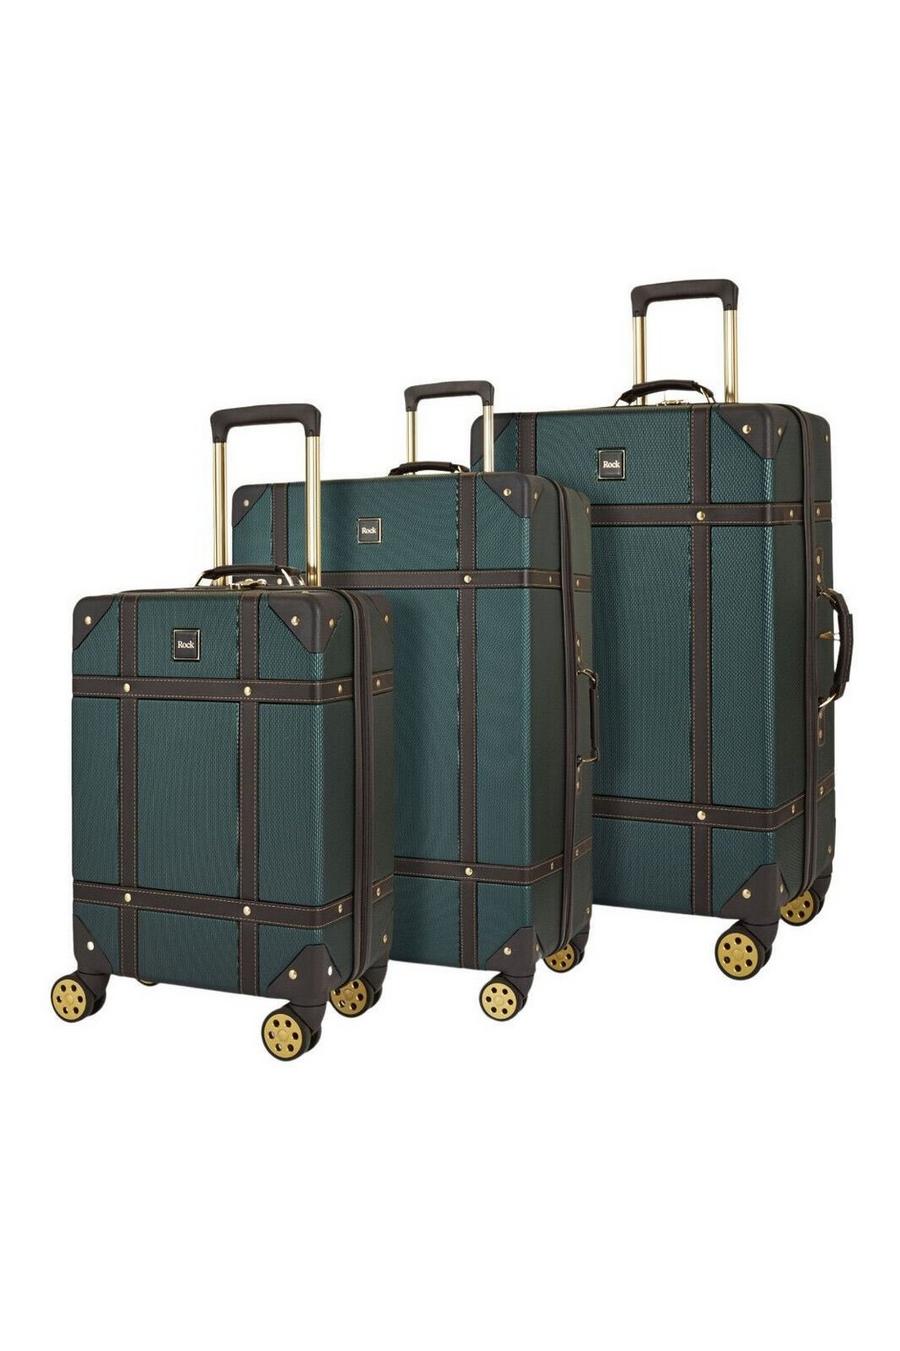 Emerald Vintage Hard Shell Luggage Suitcase Trunk Cabin Travel Bags Set Of 3